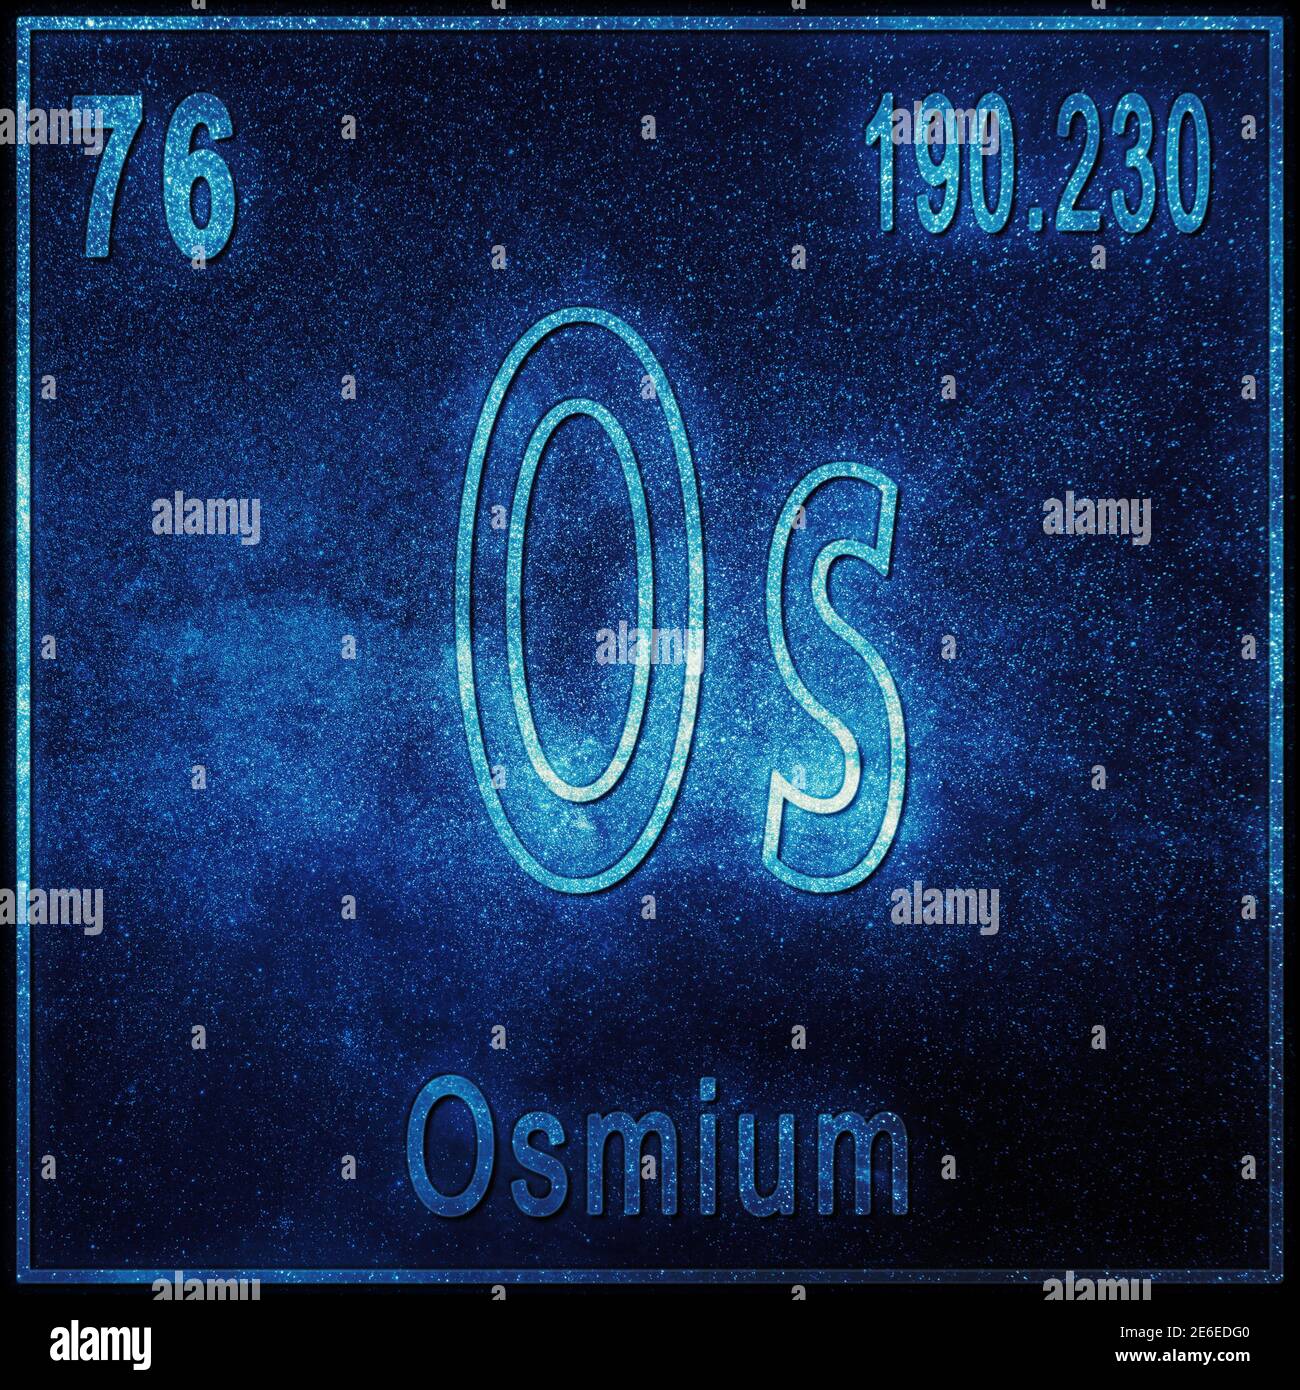 Osmium chemical element, Sign with atomic number and atomic weight, Periodic Table Element Stock Photo